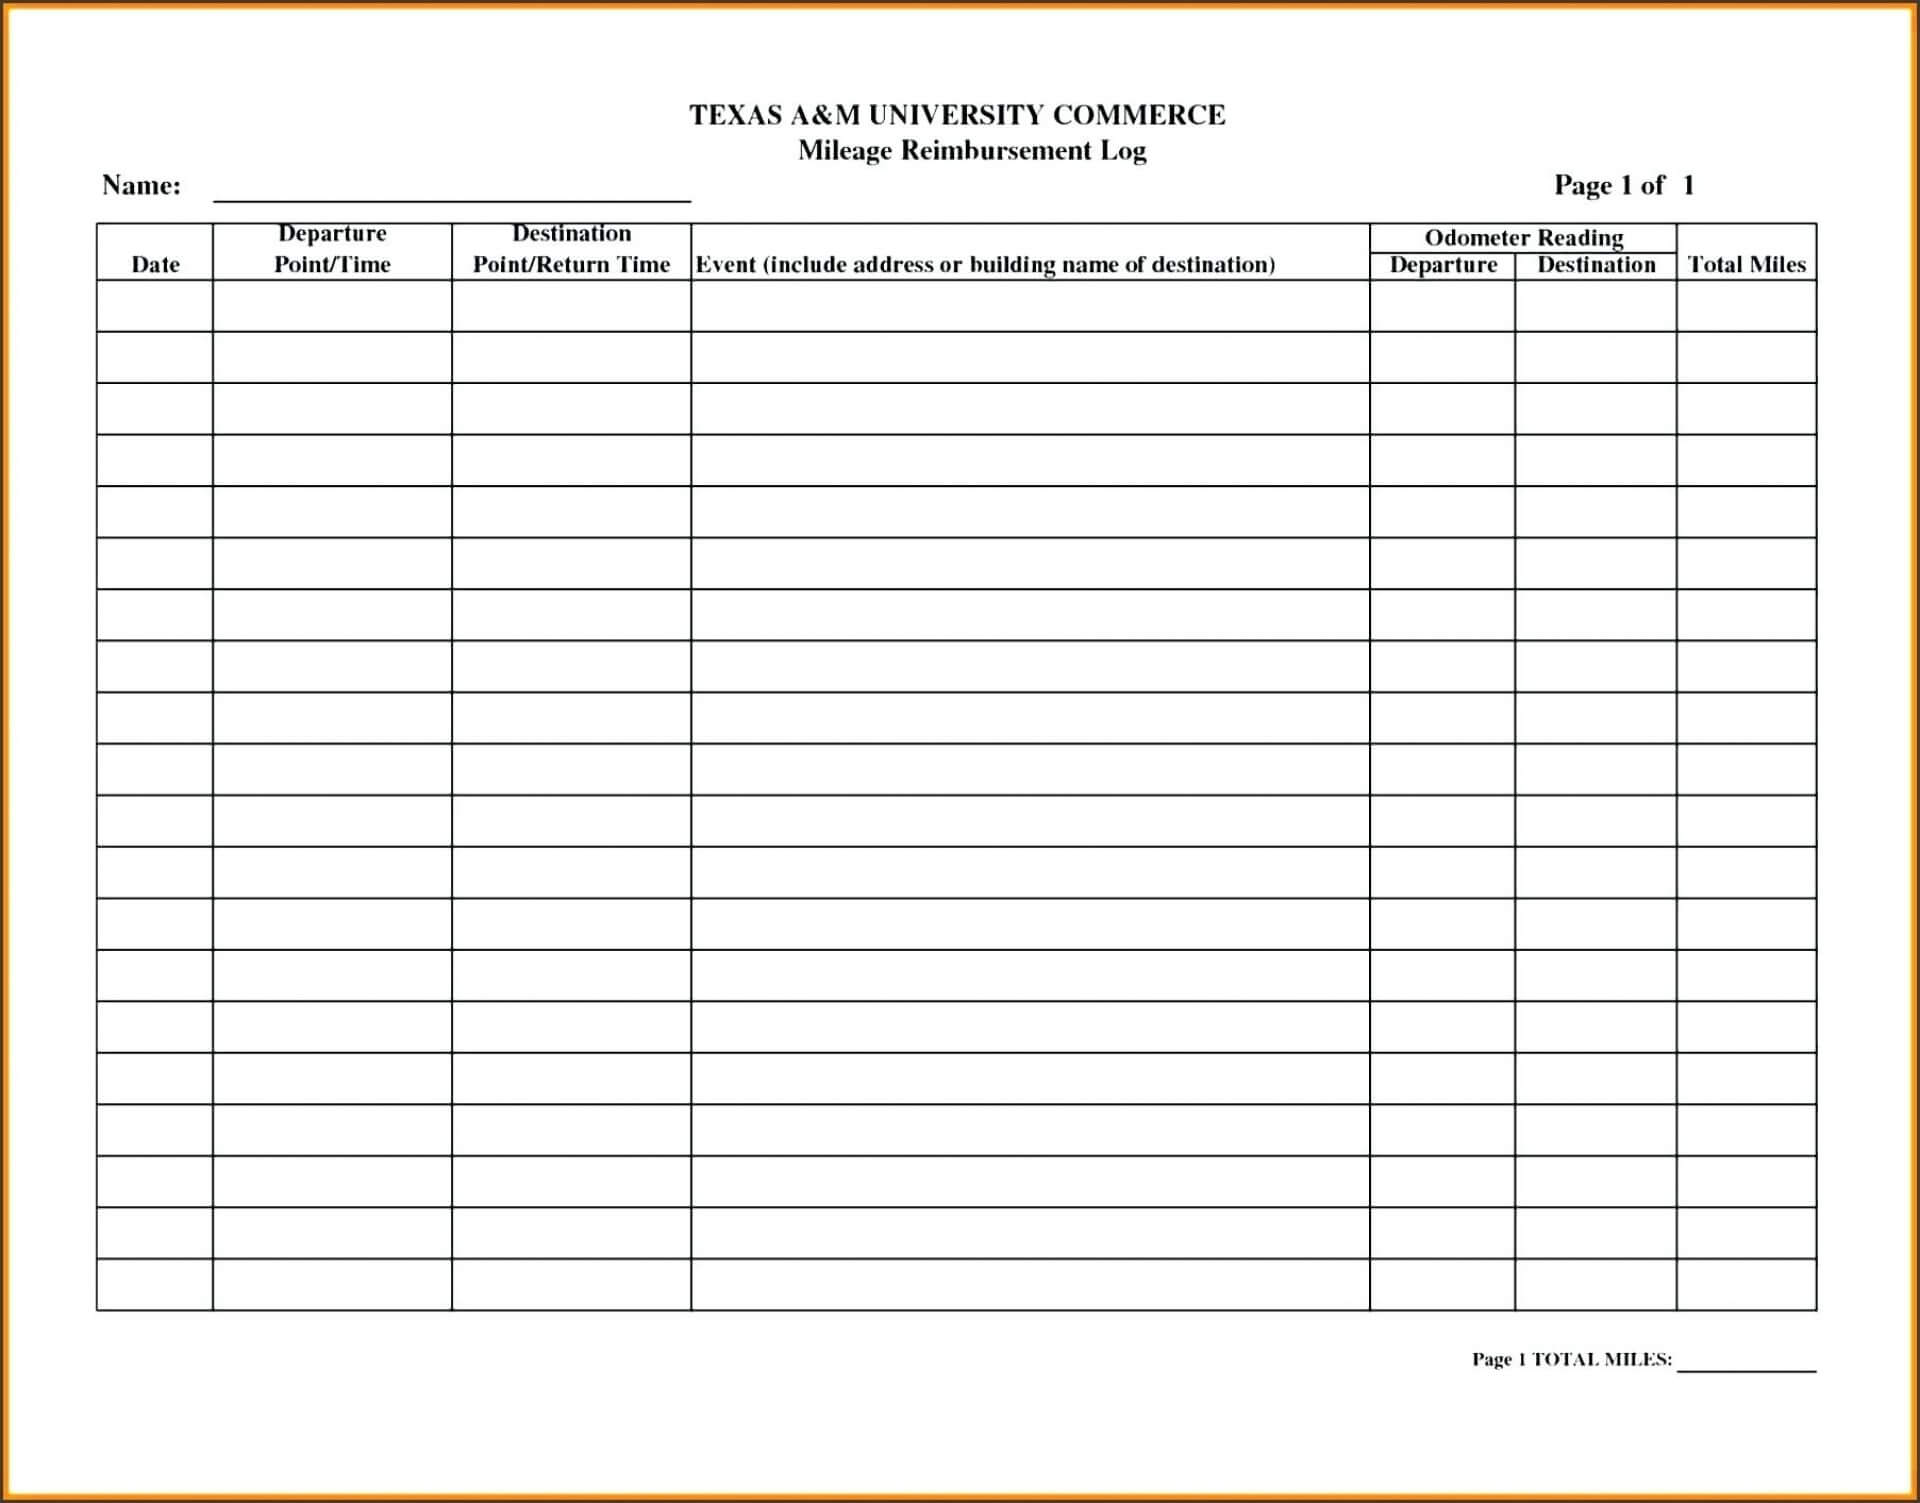 035 Mileage Log Template Excel Large Best Ideas Tracker Form Pertaining To Mileage Report Template